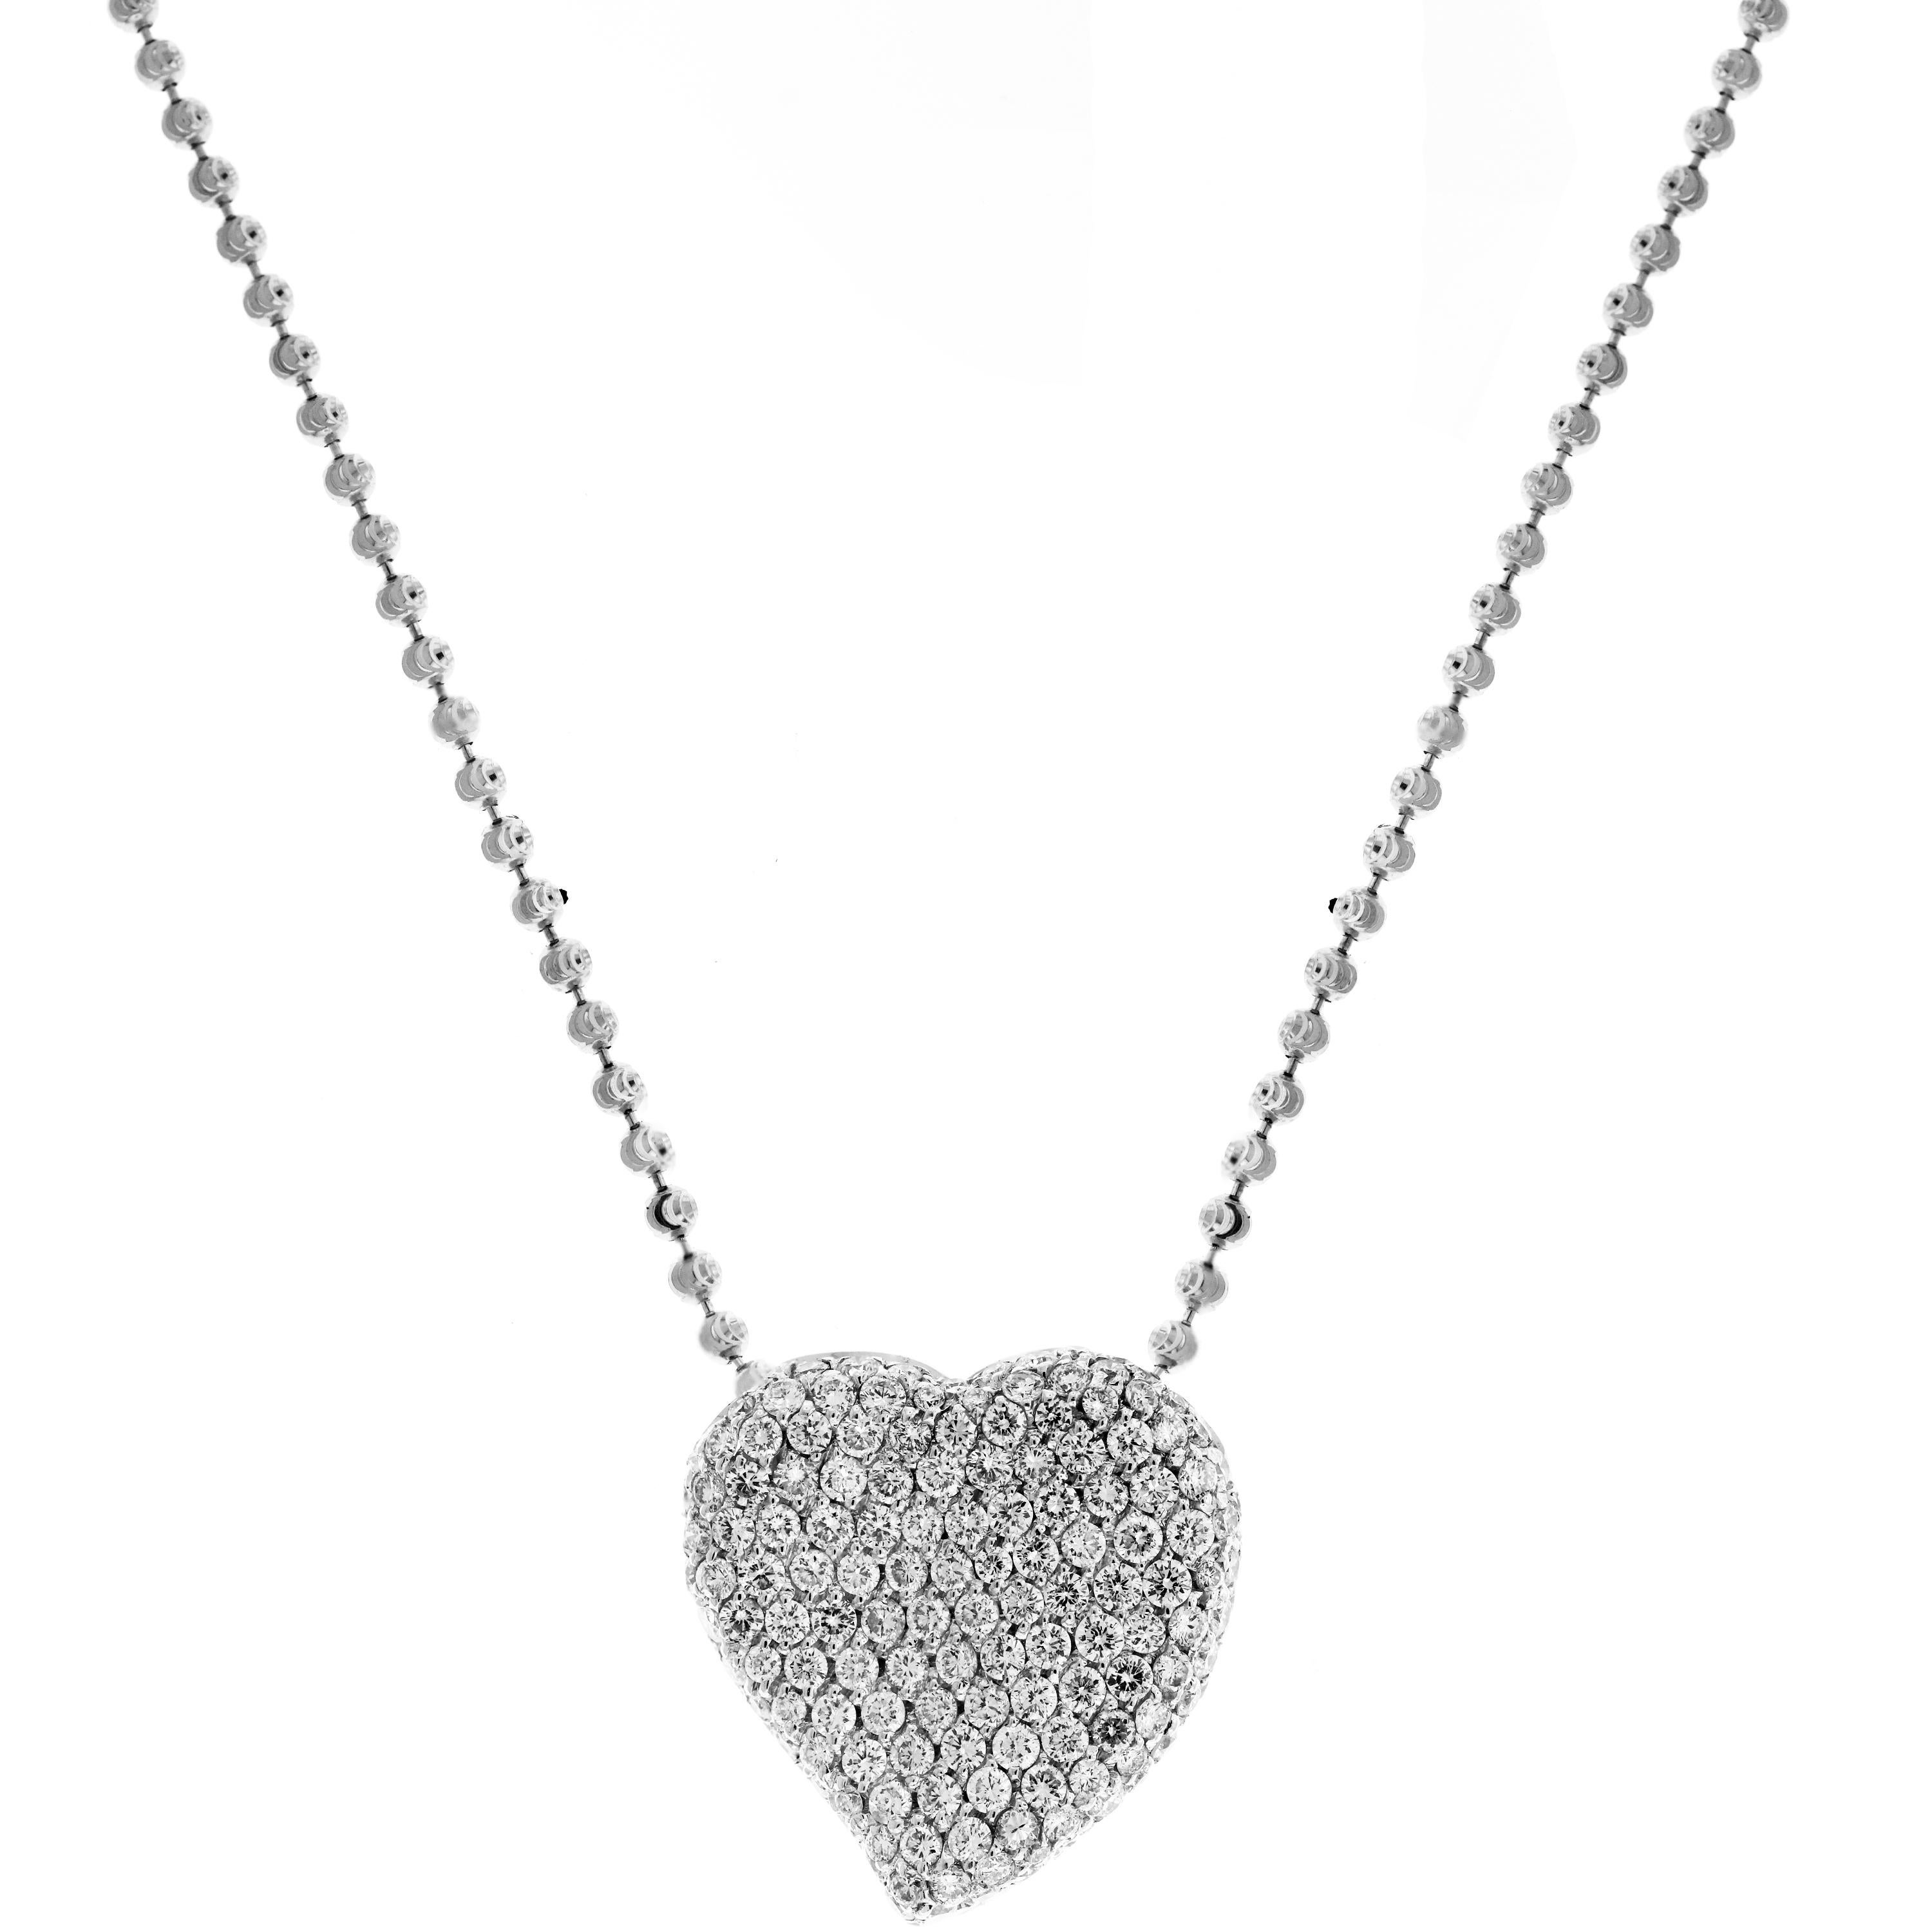 Diamond Heart Pendant White Gold Necklace with Ball Chain